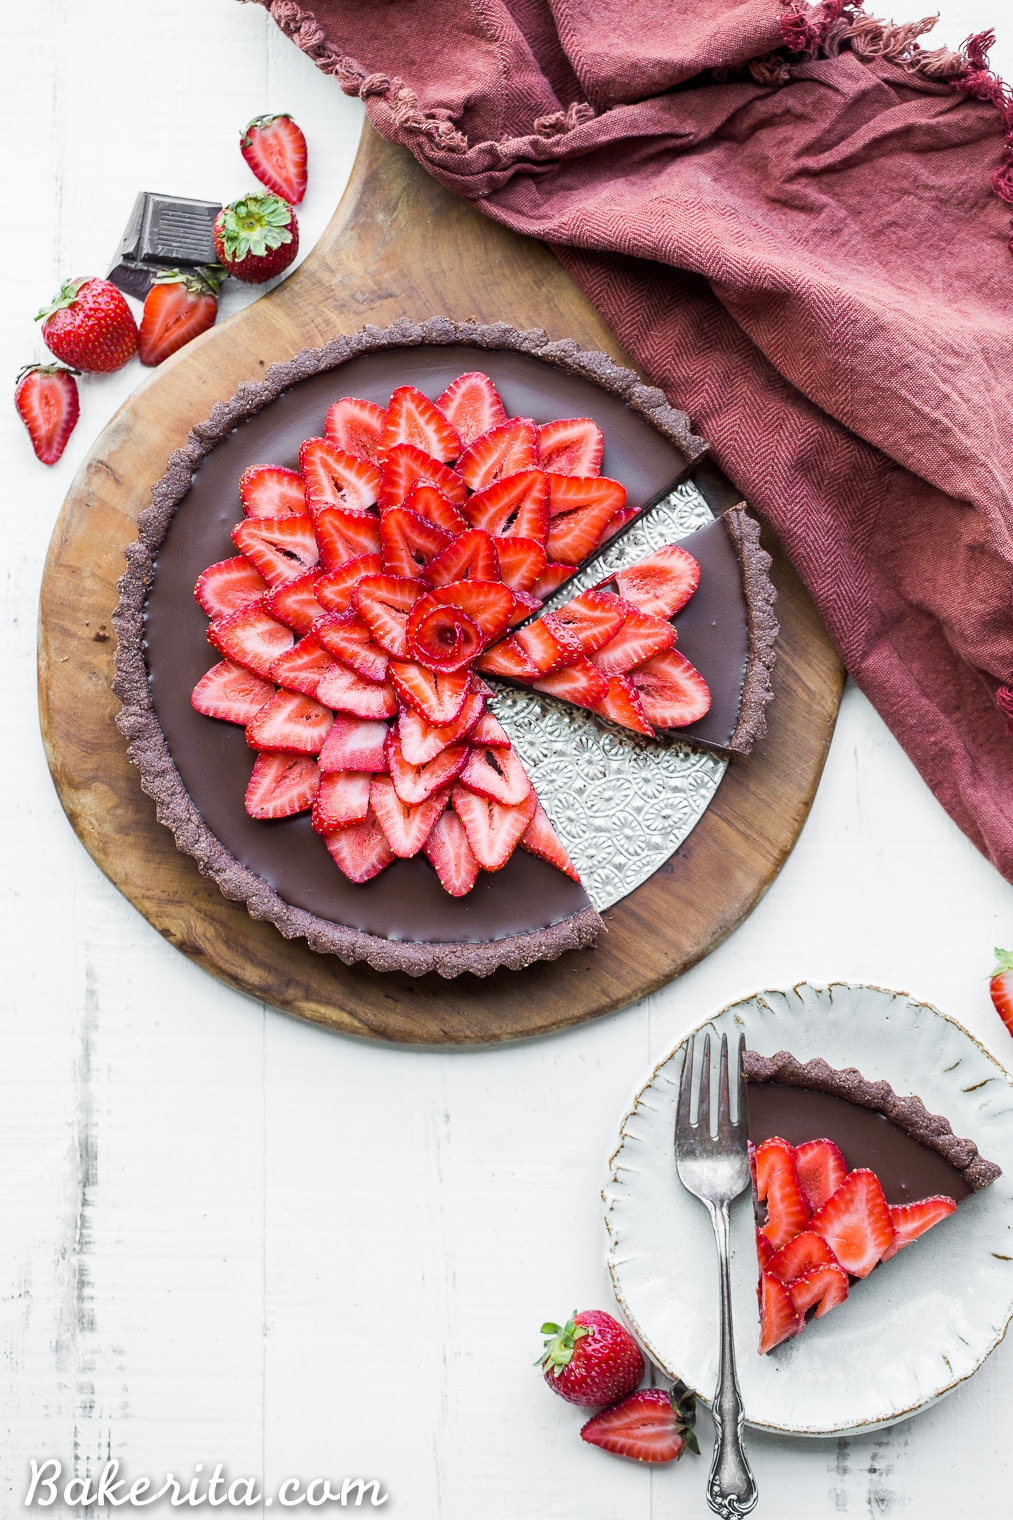 This Strawberry Chocolate Tart is filled with vegan chocolate ganache and topped with fresh strawberries, all in a chocolate crust. Slice into this easy and delicious gluten-free, Paleo, and vegan dessert.